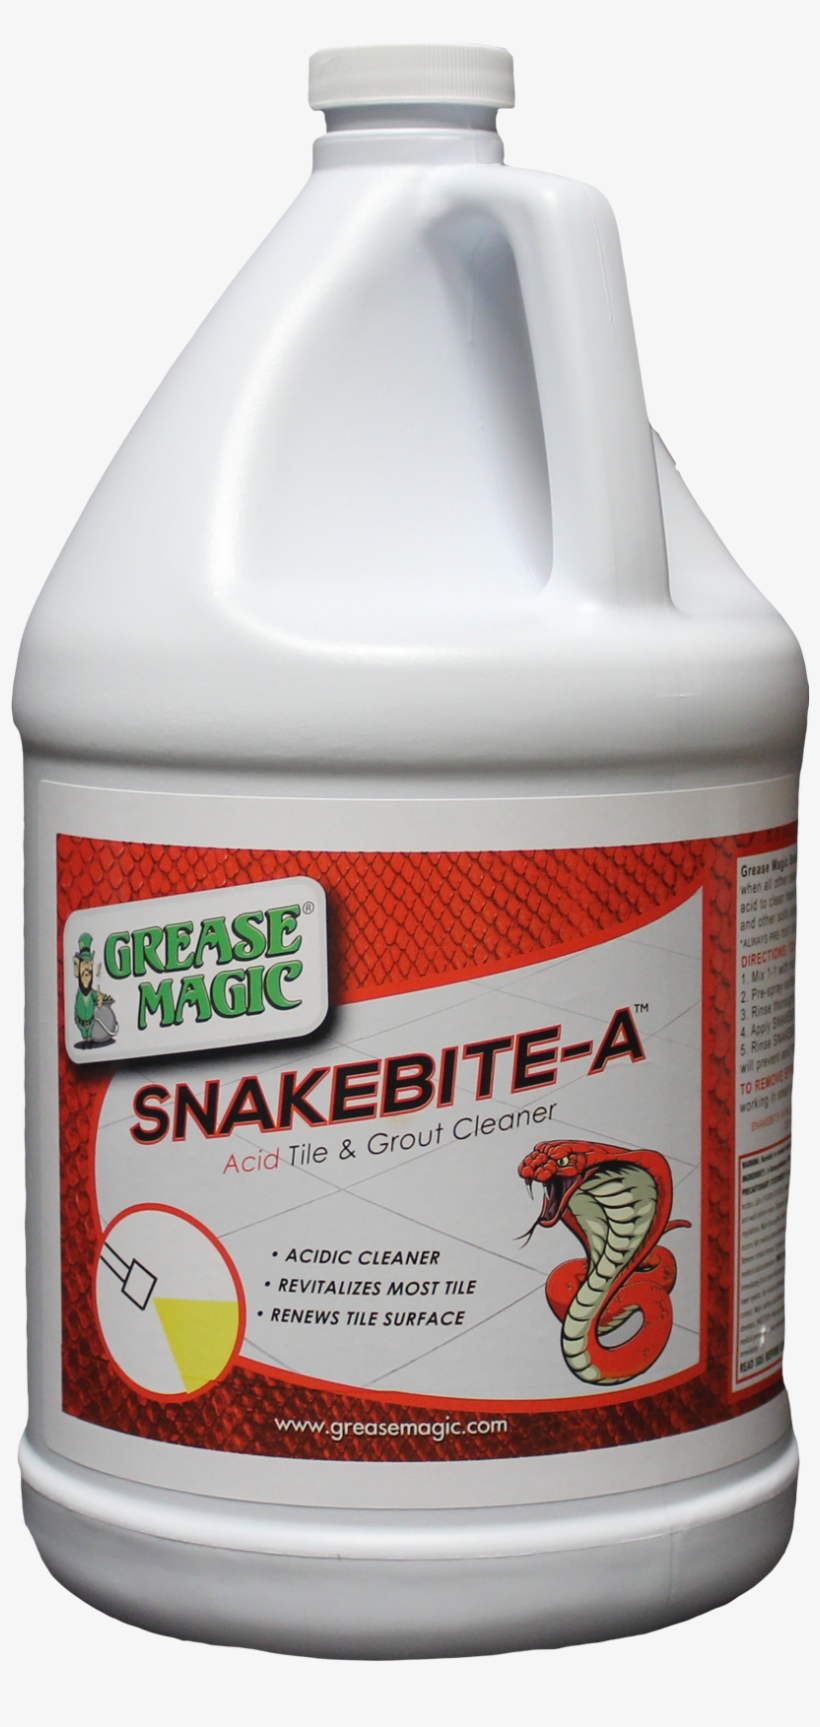 Grease Magic Snakebite-a - Koi, transparent png #8003821